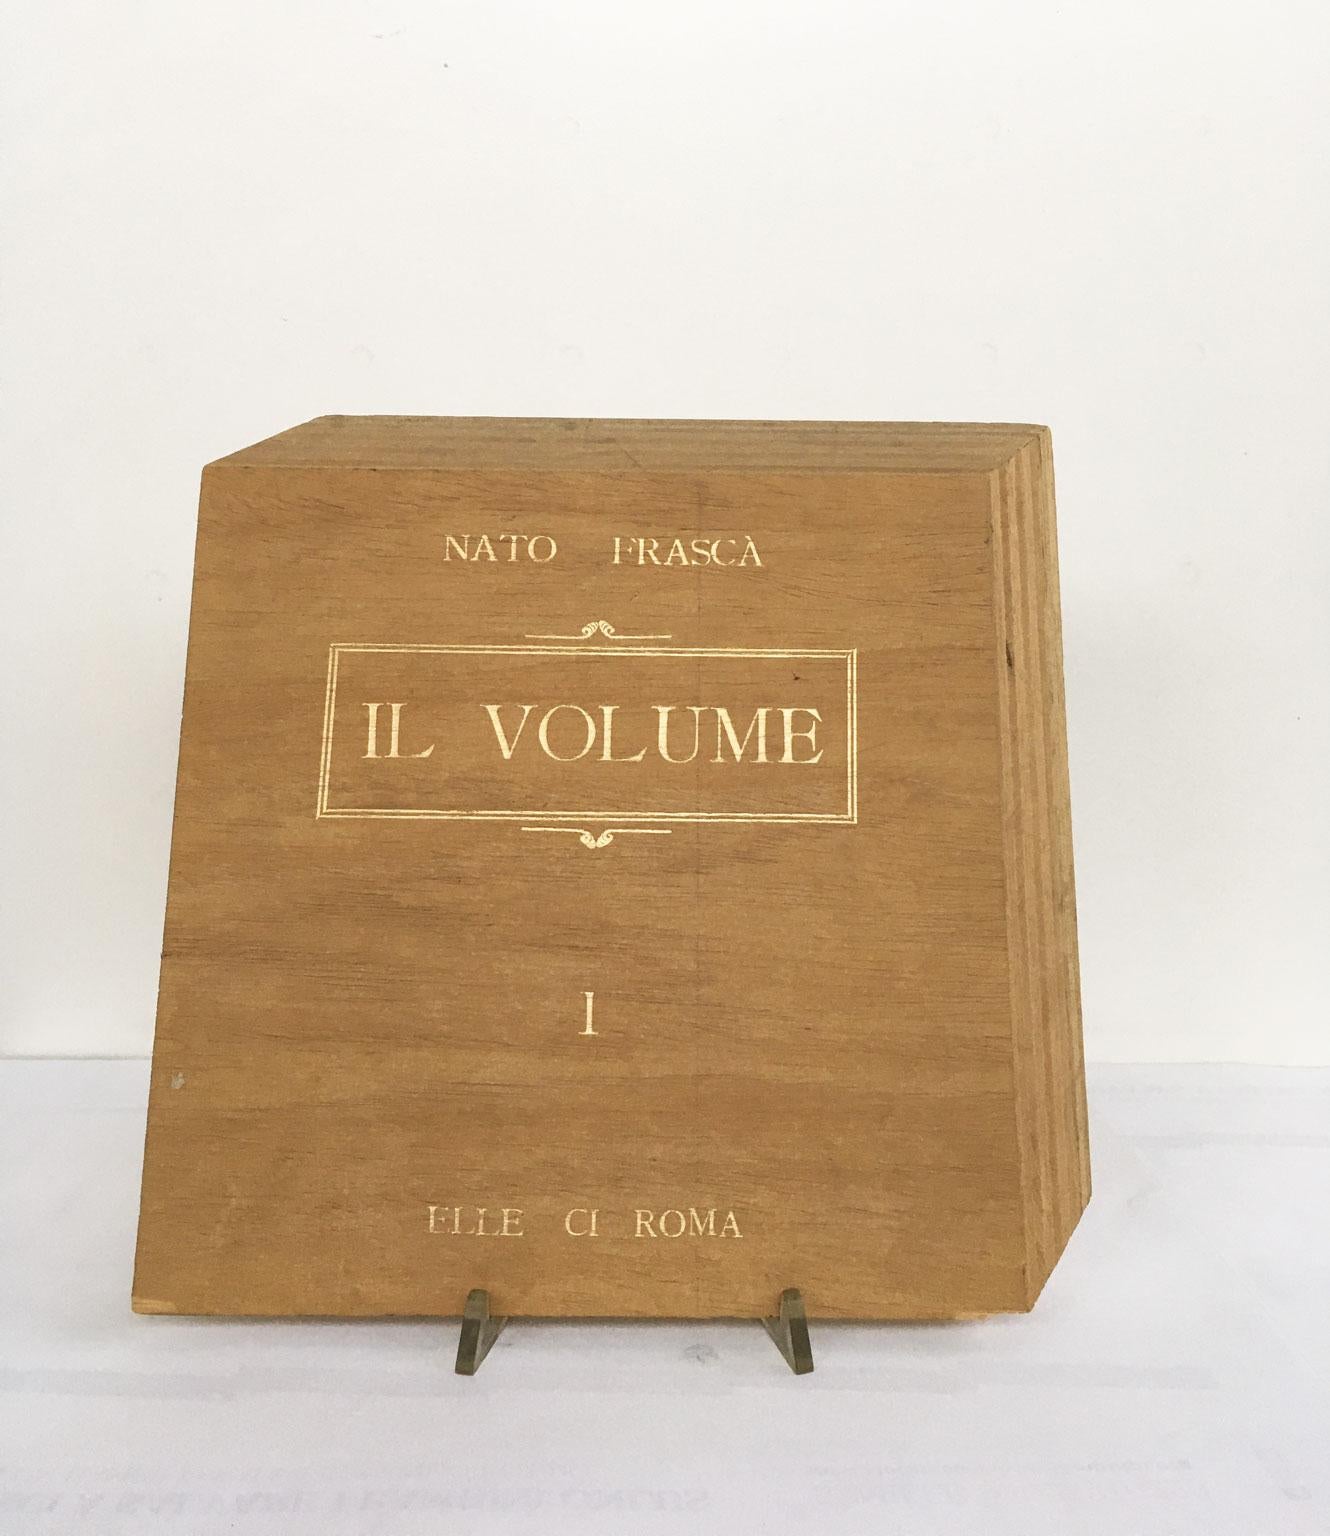 1975 Italy Abstract Wooden Sculpture by Nato Frascà Il Volume The Book For Sale 5